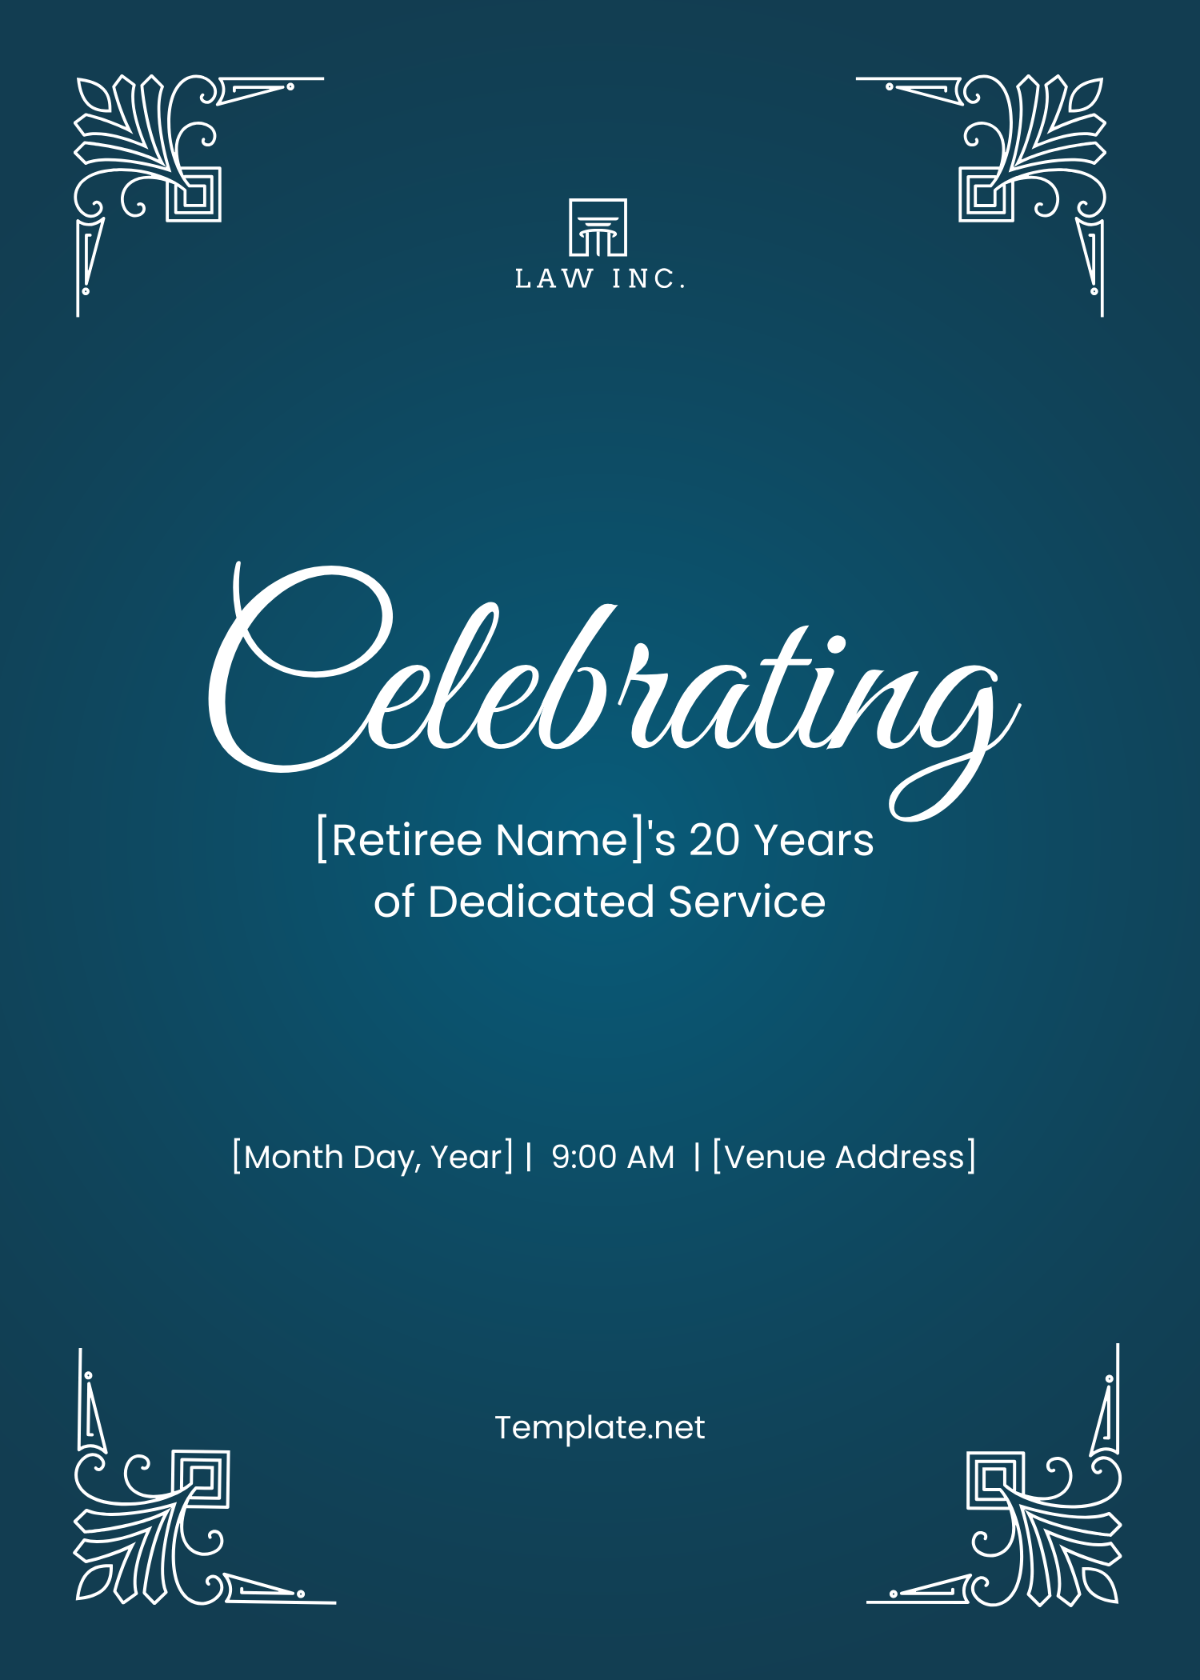 Free Law Firm Retirement Invitation Template